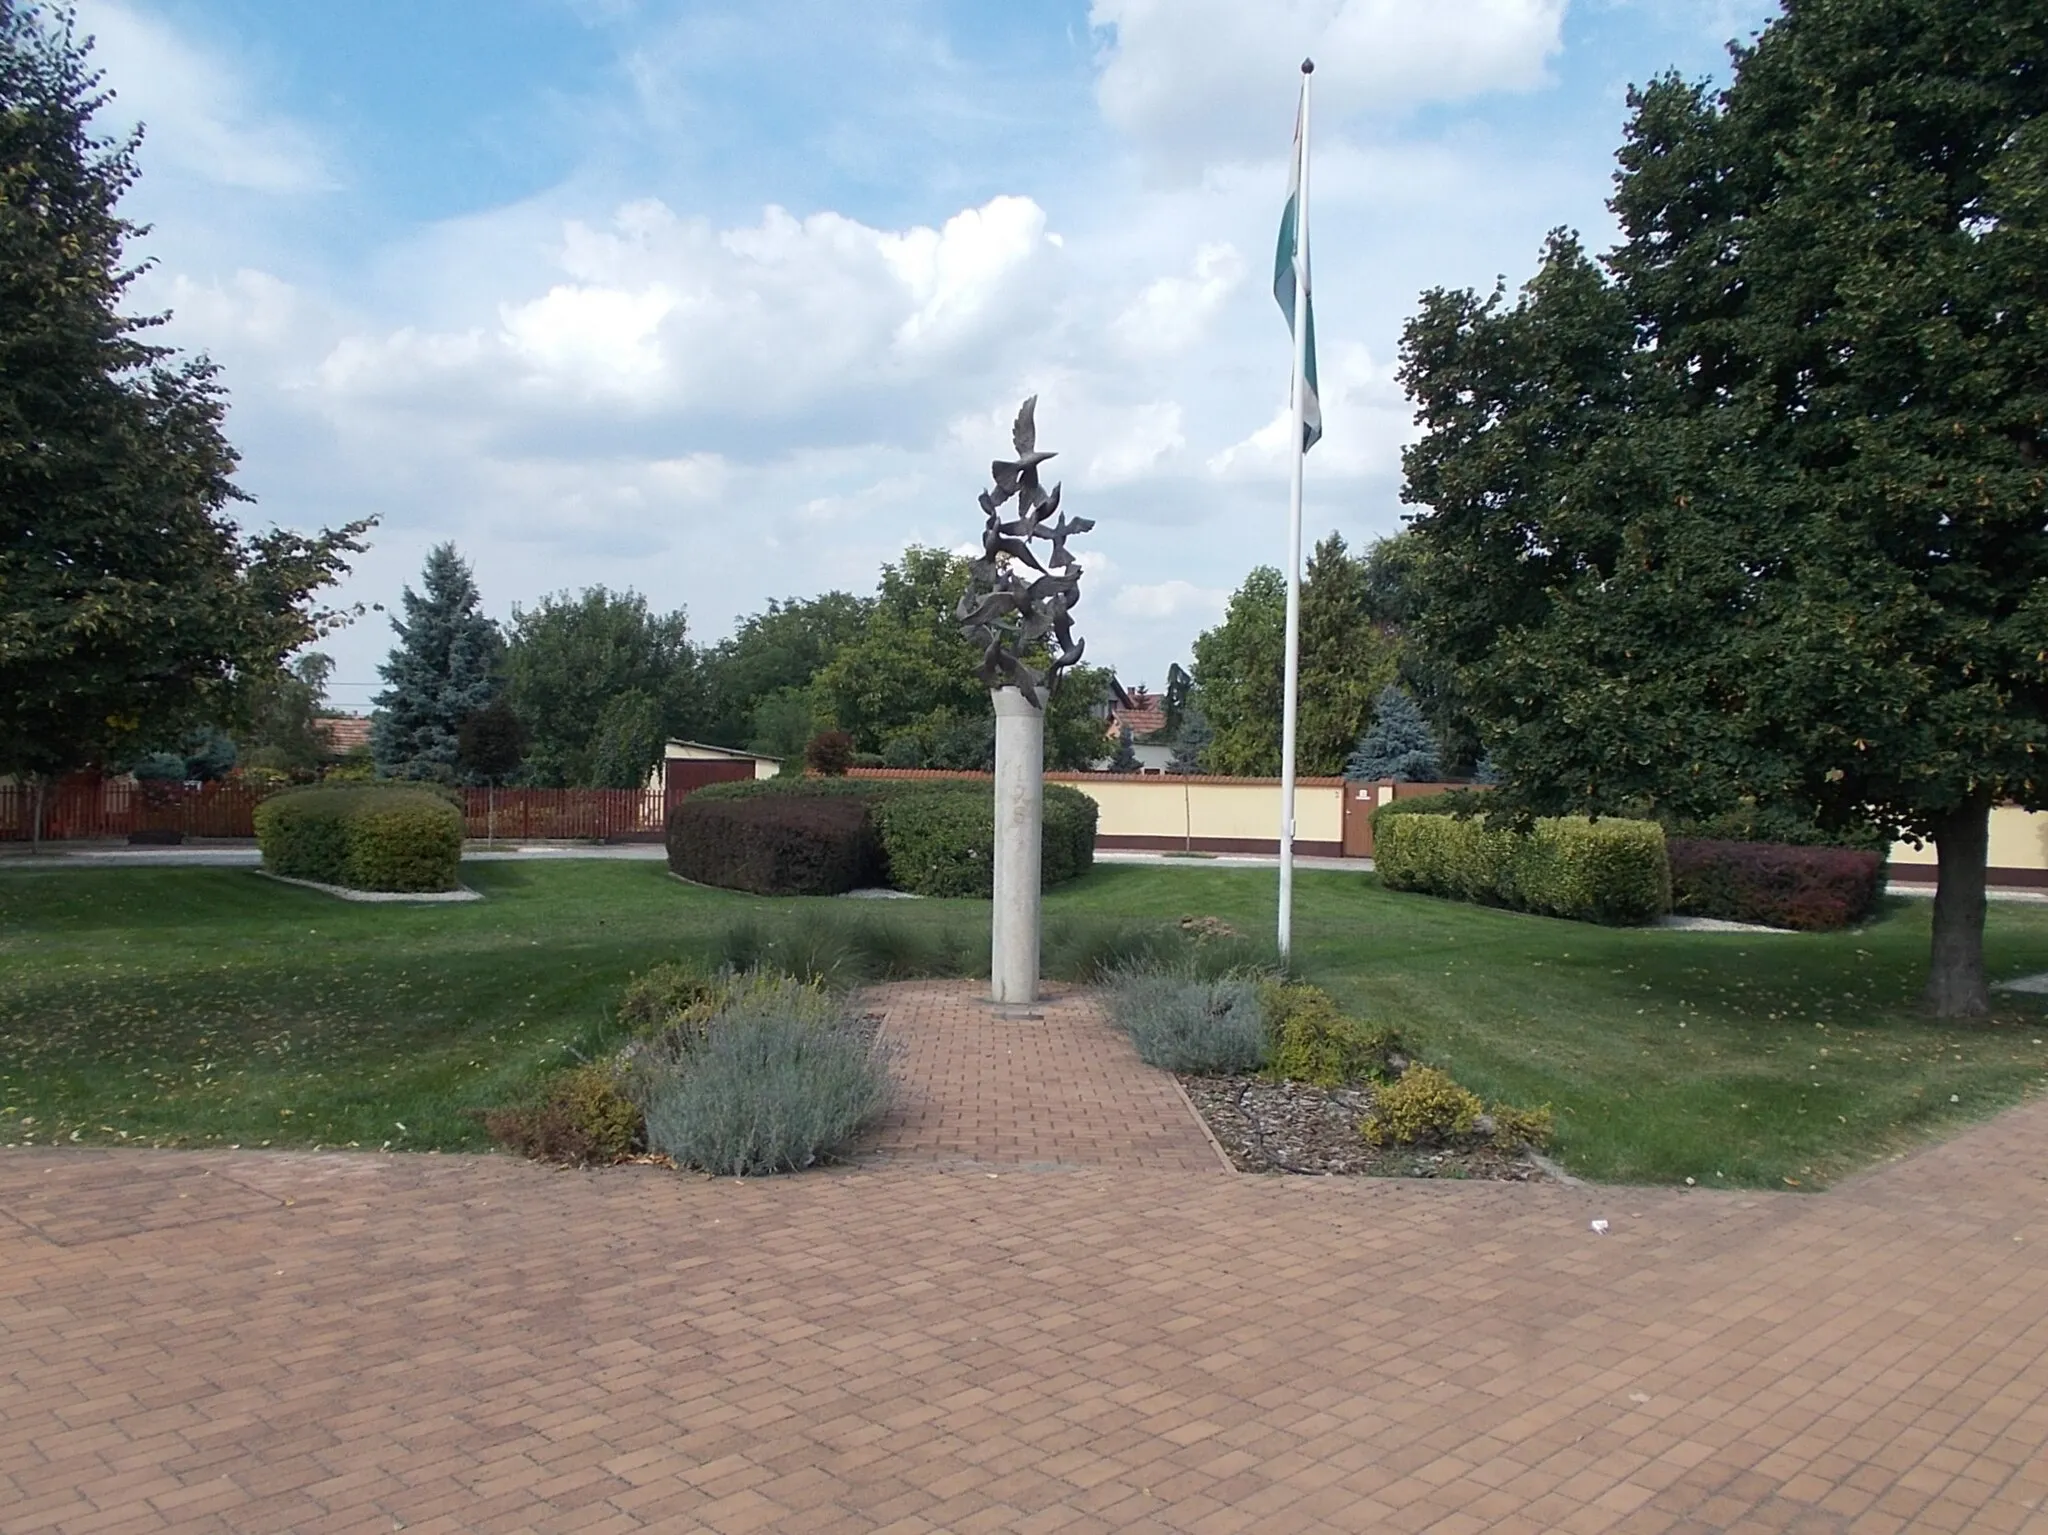 Photo showing: Memorial column of the 1956 Hungarian Revolution by Károly Barth (2006 works, 2.5-3 meters high limestone column, nine 'flying' bronze birds). There are ground based plaques at the memorial - in a Park at Szent István Street and Somogyi Béla Street intersection, /Szent István Square other name Templom Square/, Gyálliget neighborhood, Gyál, Pest County, Hungary.